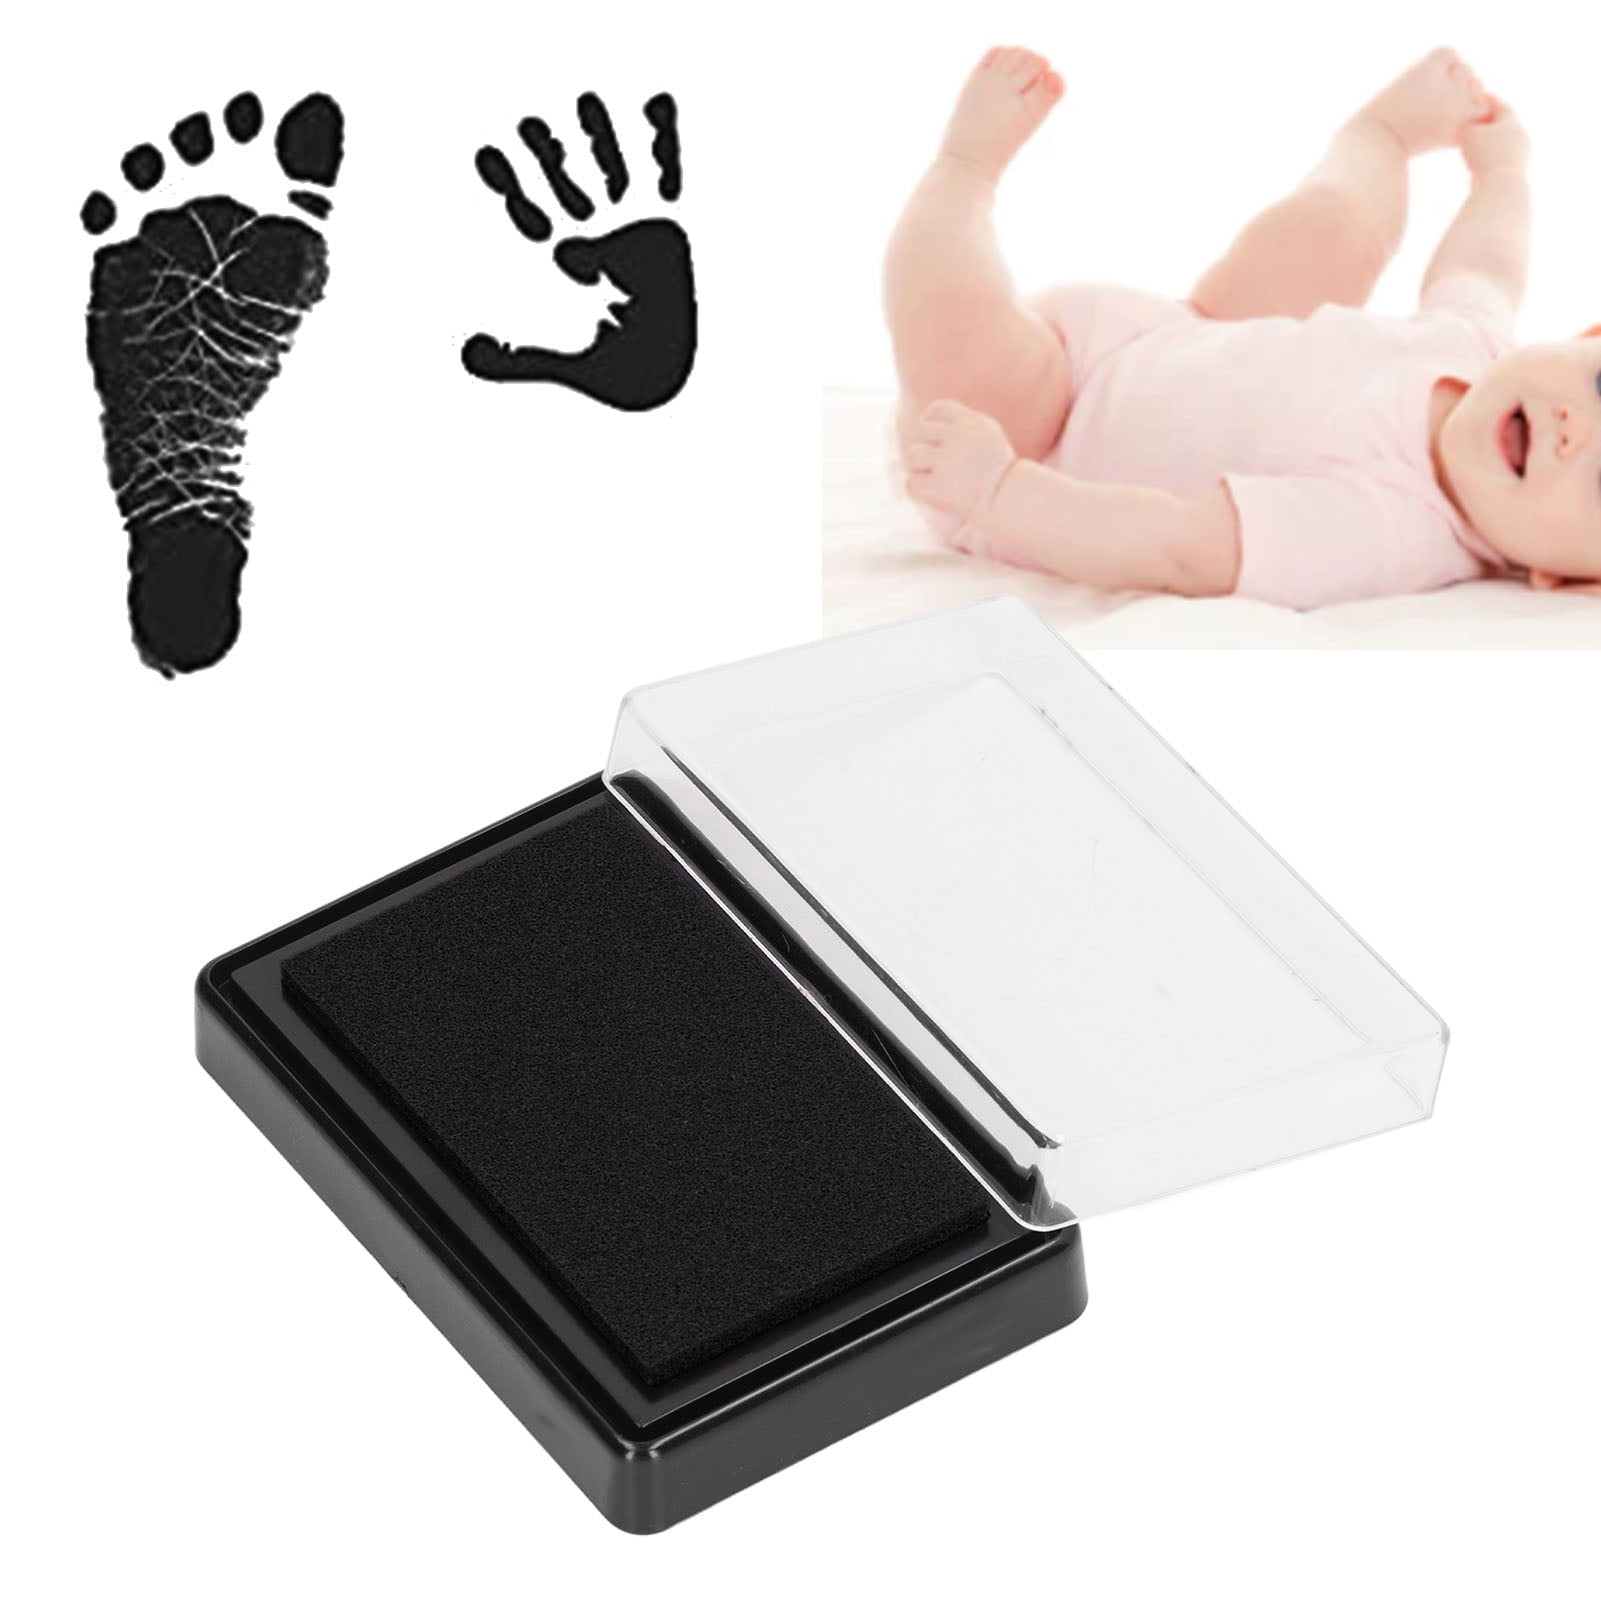 Non-Toxic Baby Hand And Foot Prints Hand And Footprint Pad Ink - Black  Footprints Handprints Ink Pad Safe Acid-Free No-Mess Inkpad for Baby Infant  New